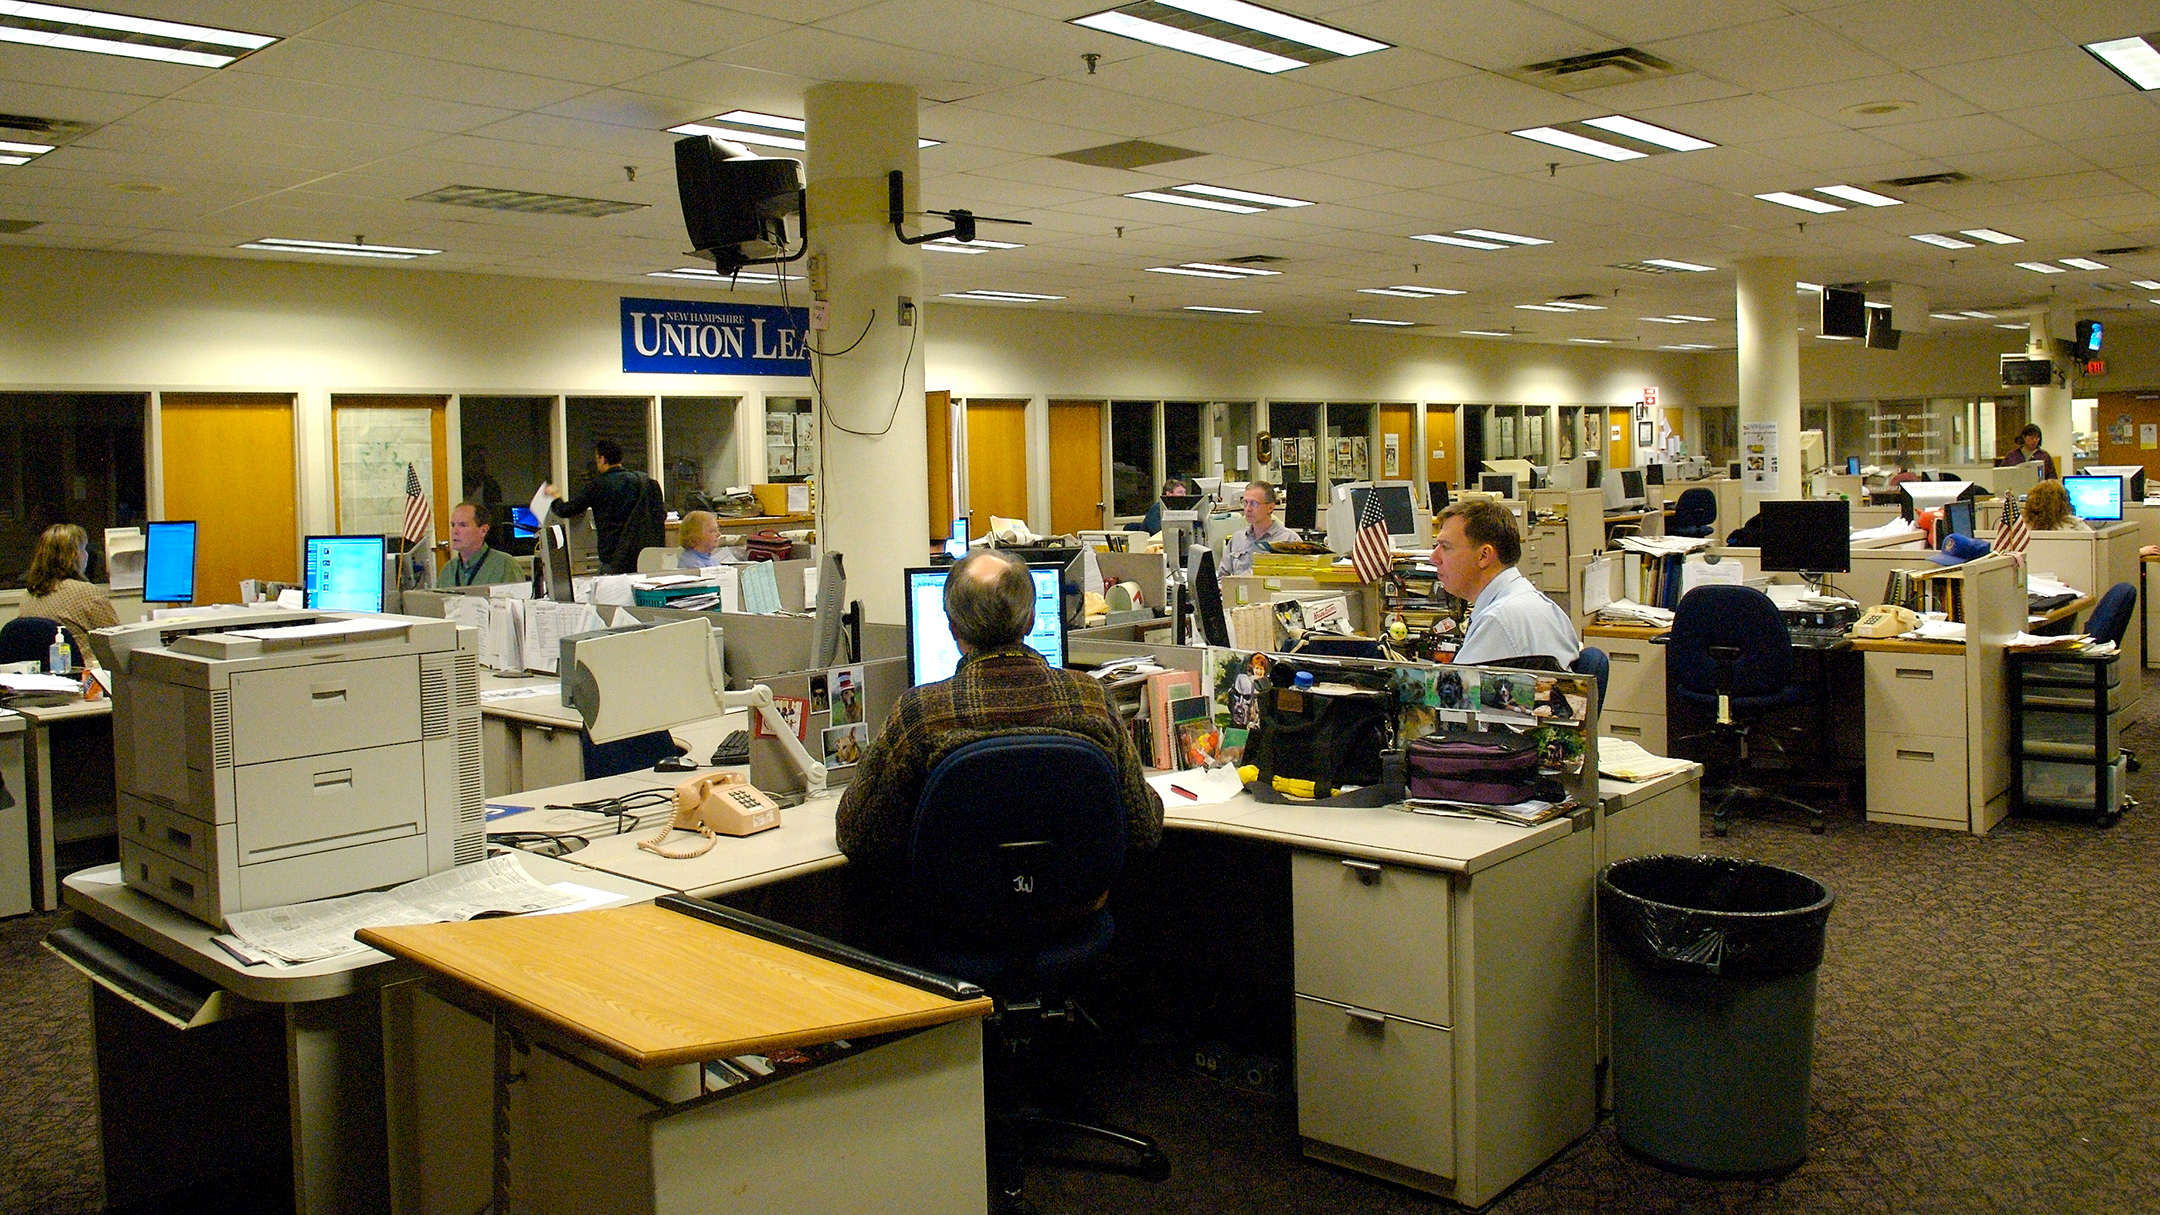 Journalists sitting in cubicles work in front of their computers